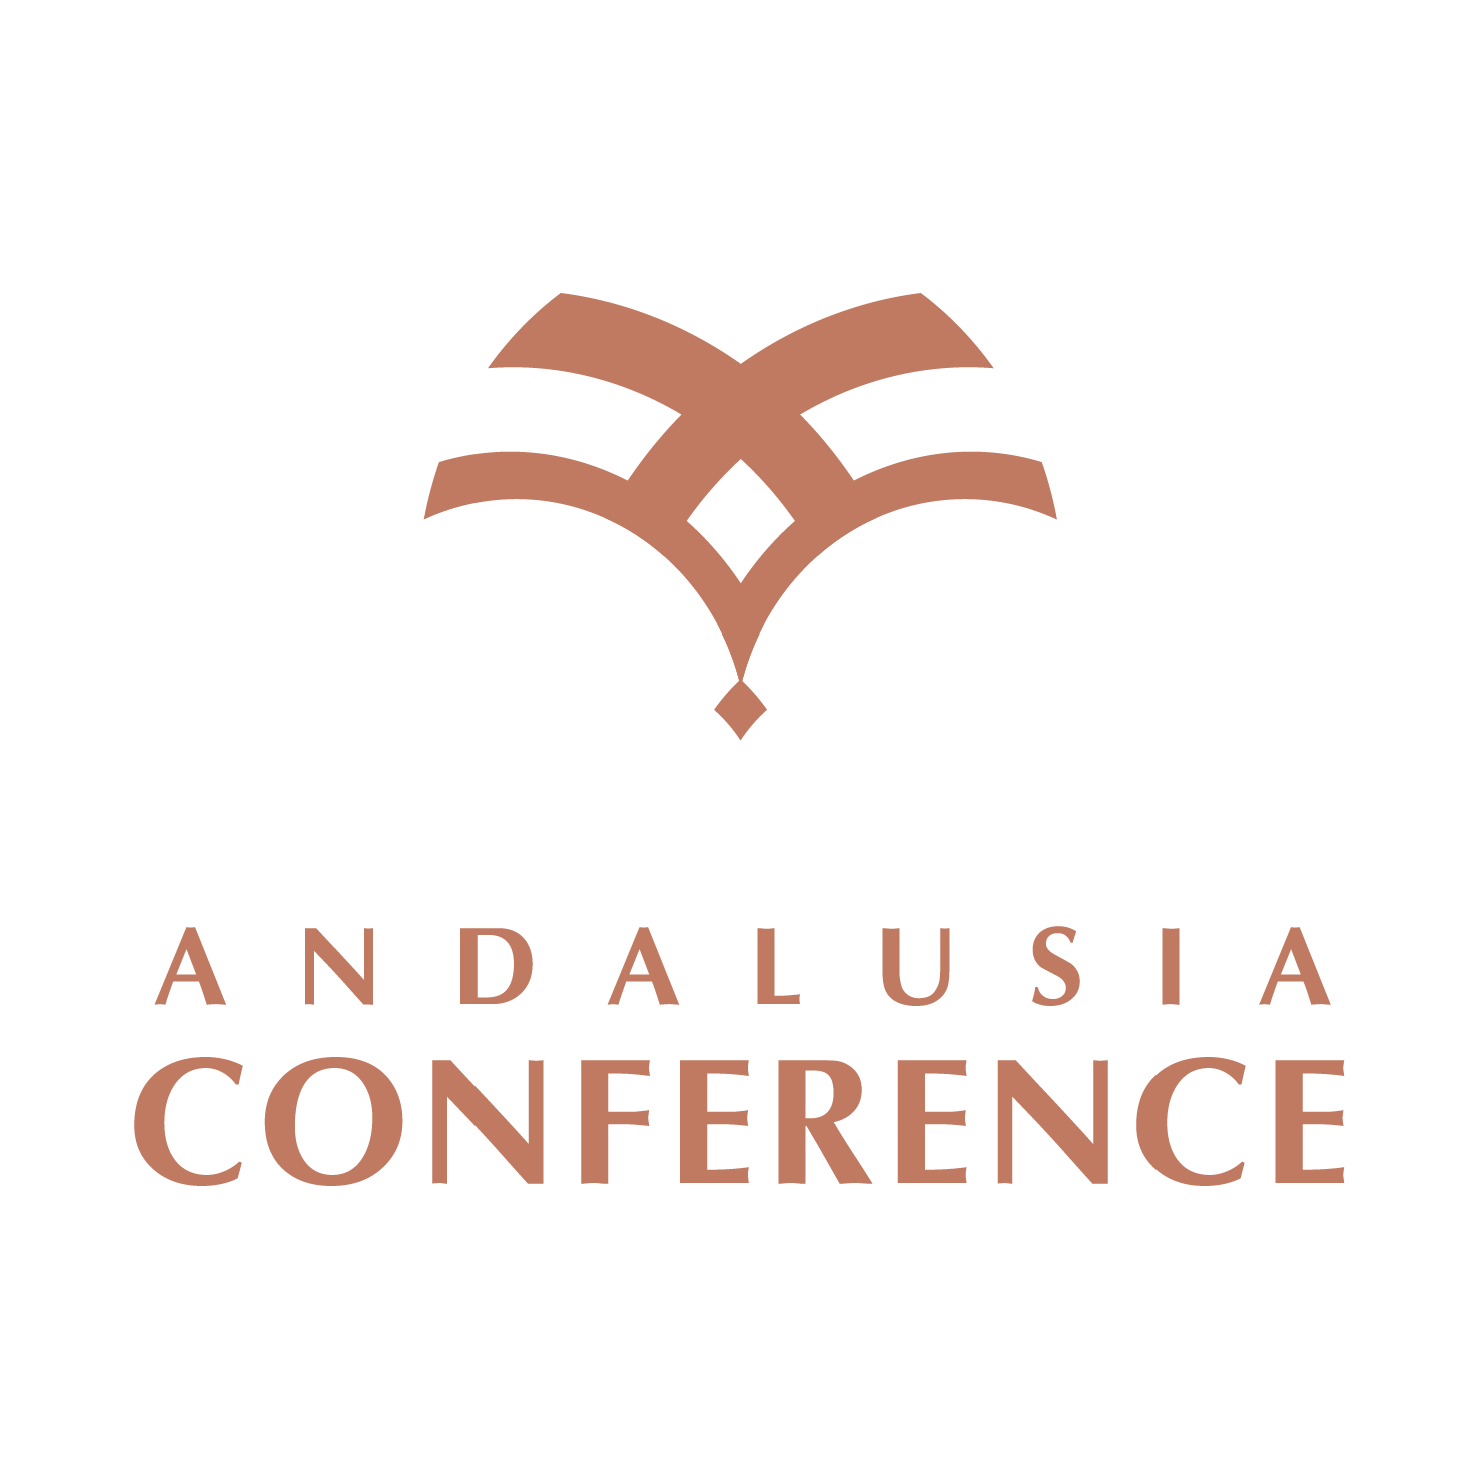 Andalusia Conference